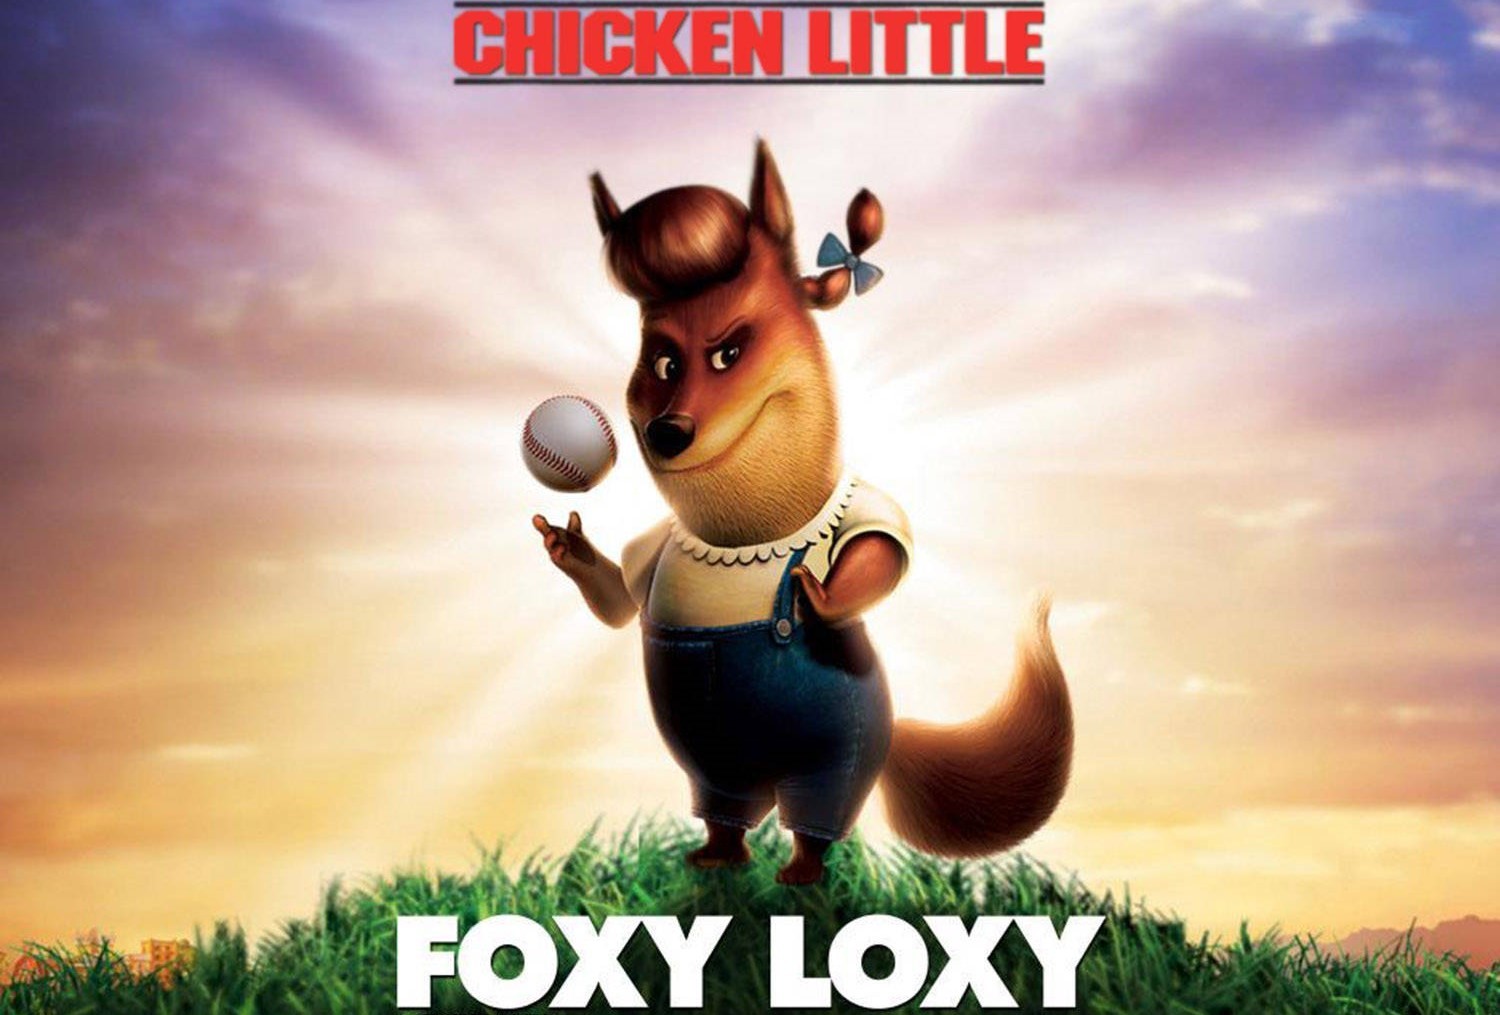 13-facts-about-foxy-loxy-chicken-little